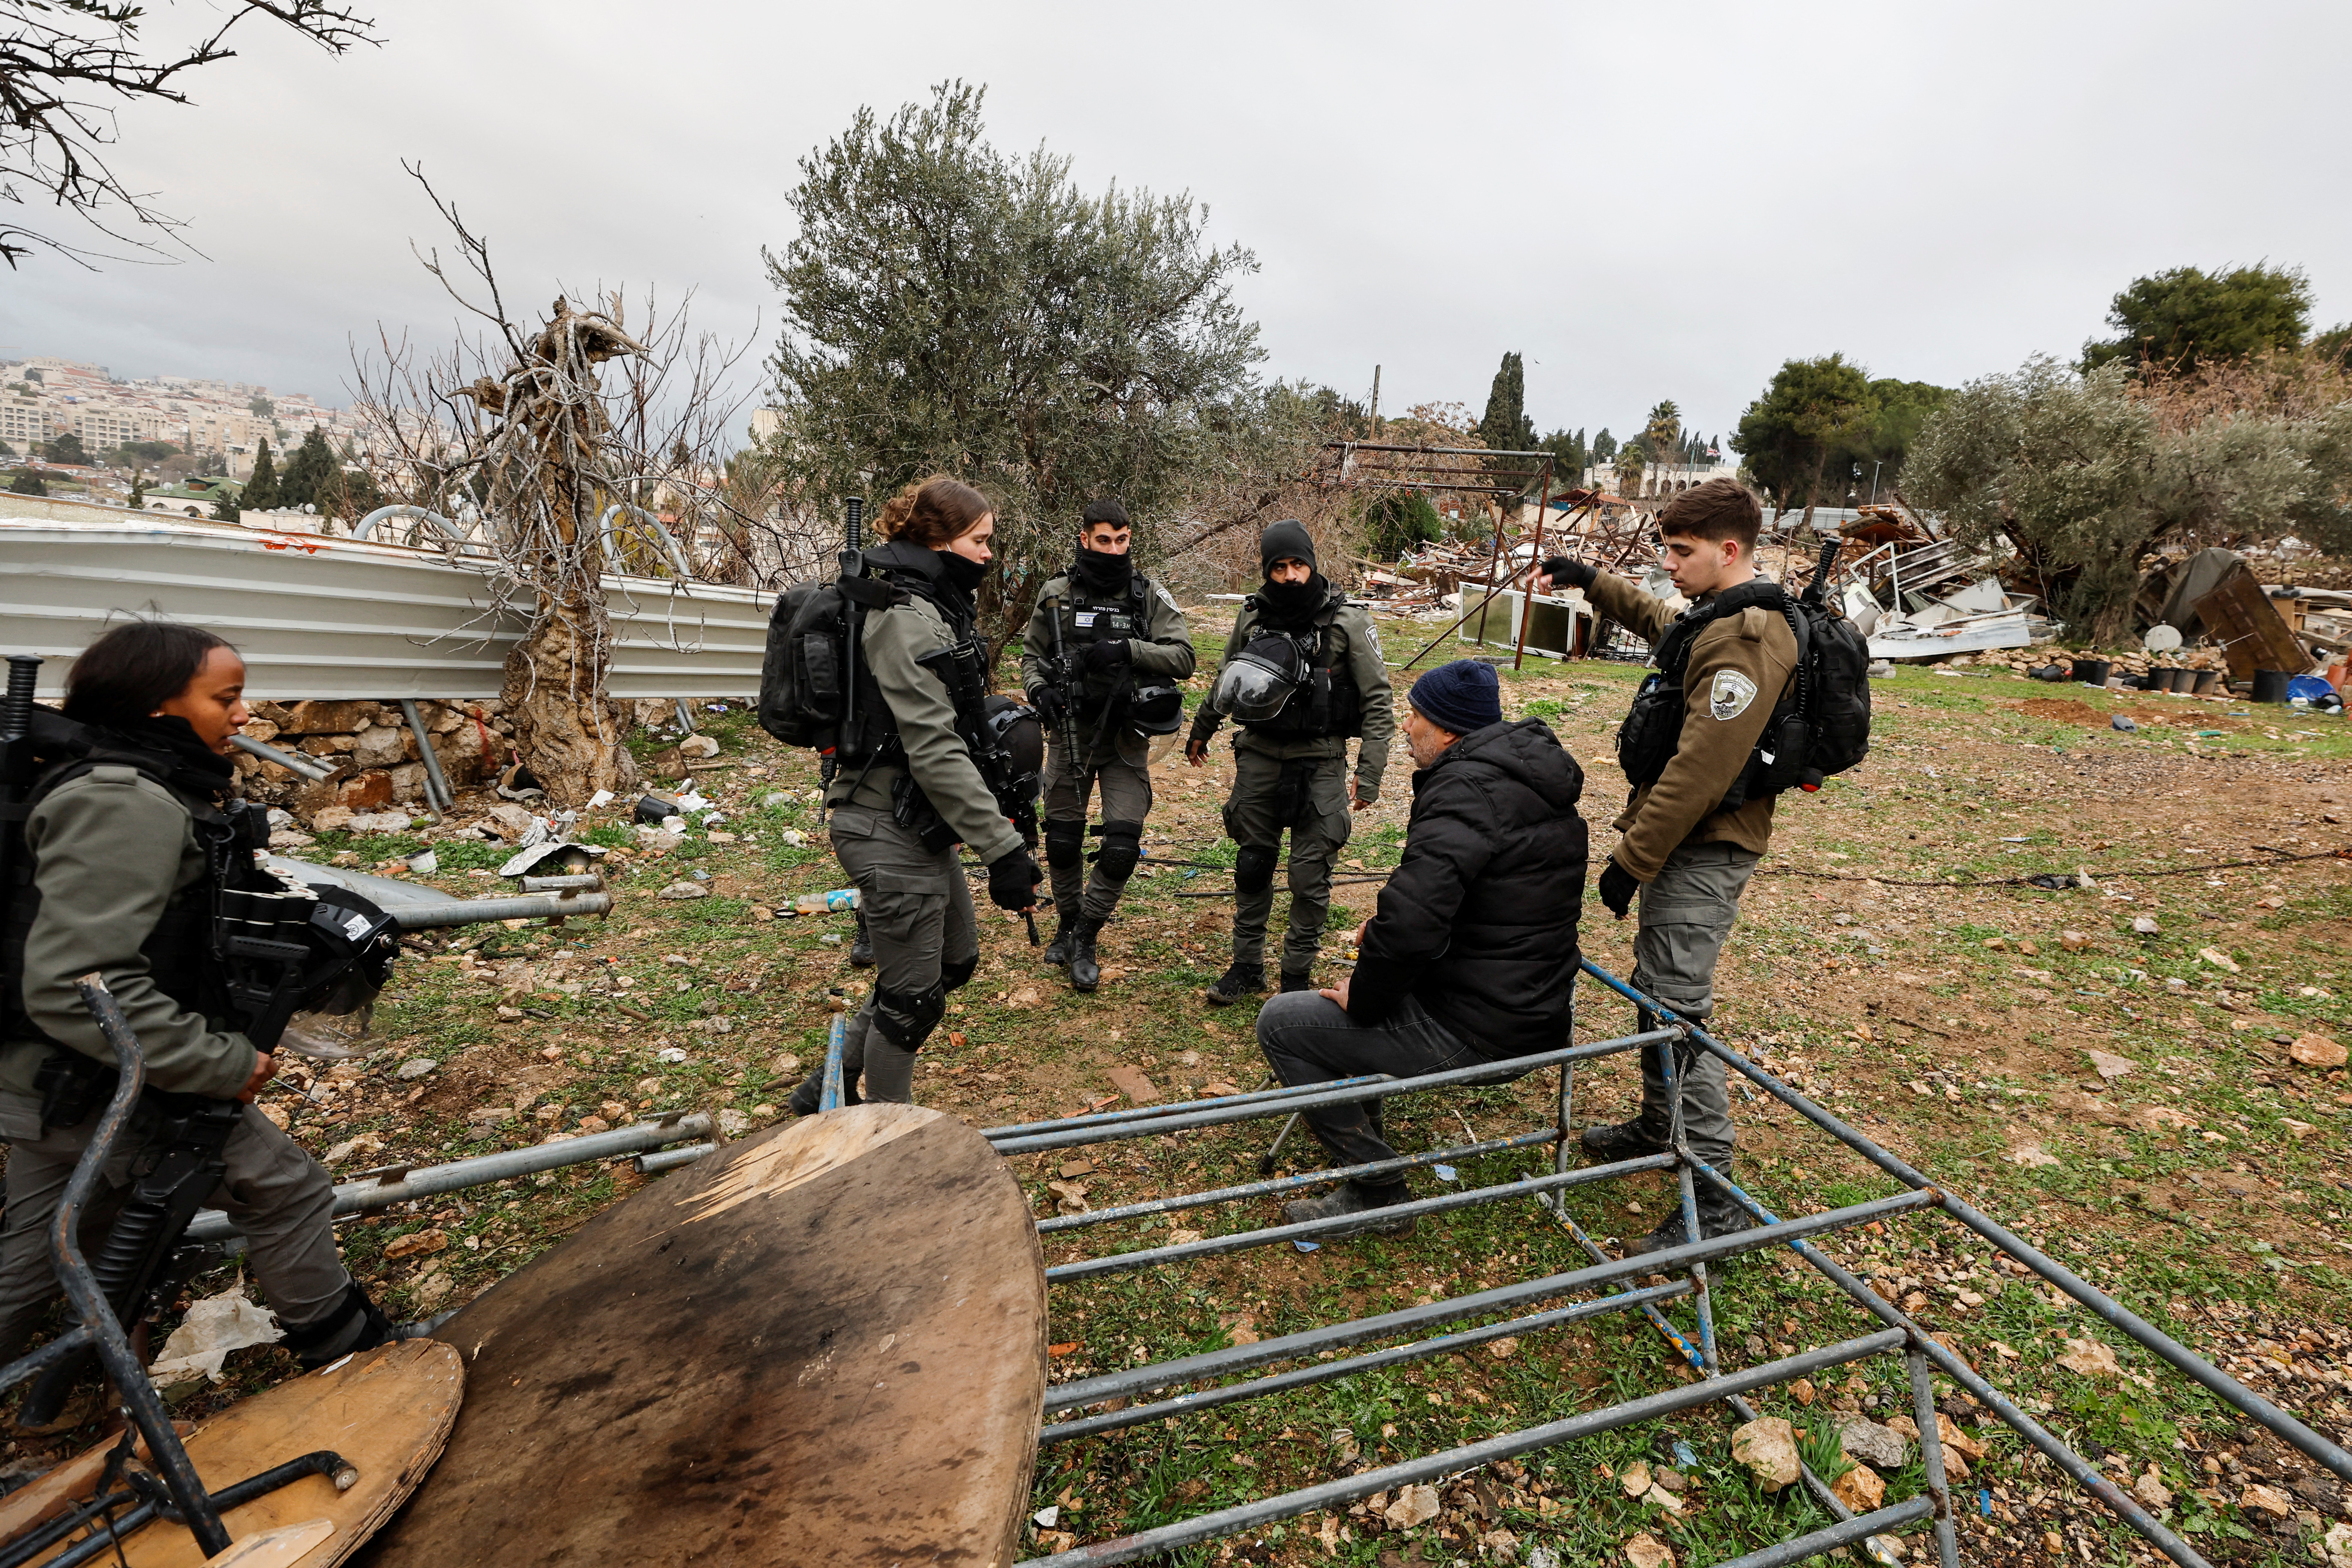 Members of the Israeli border police speak with a Palestinian man at the site of a demolished house in the Sheikh Jarrah neighbourhood of East Jerusalem January 19, 2022. REUTERS/Ammar Awad